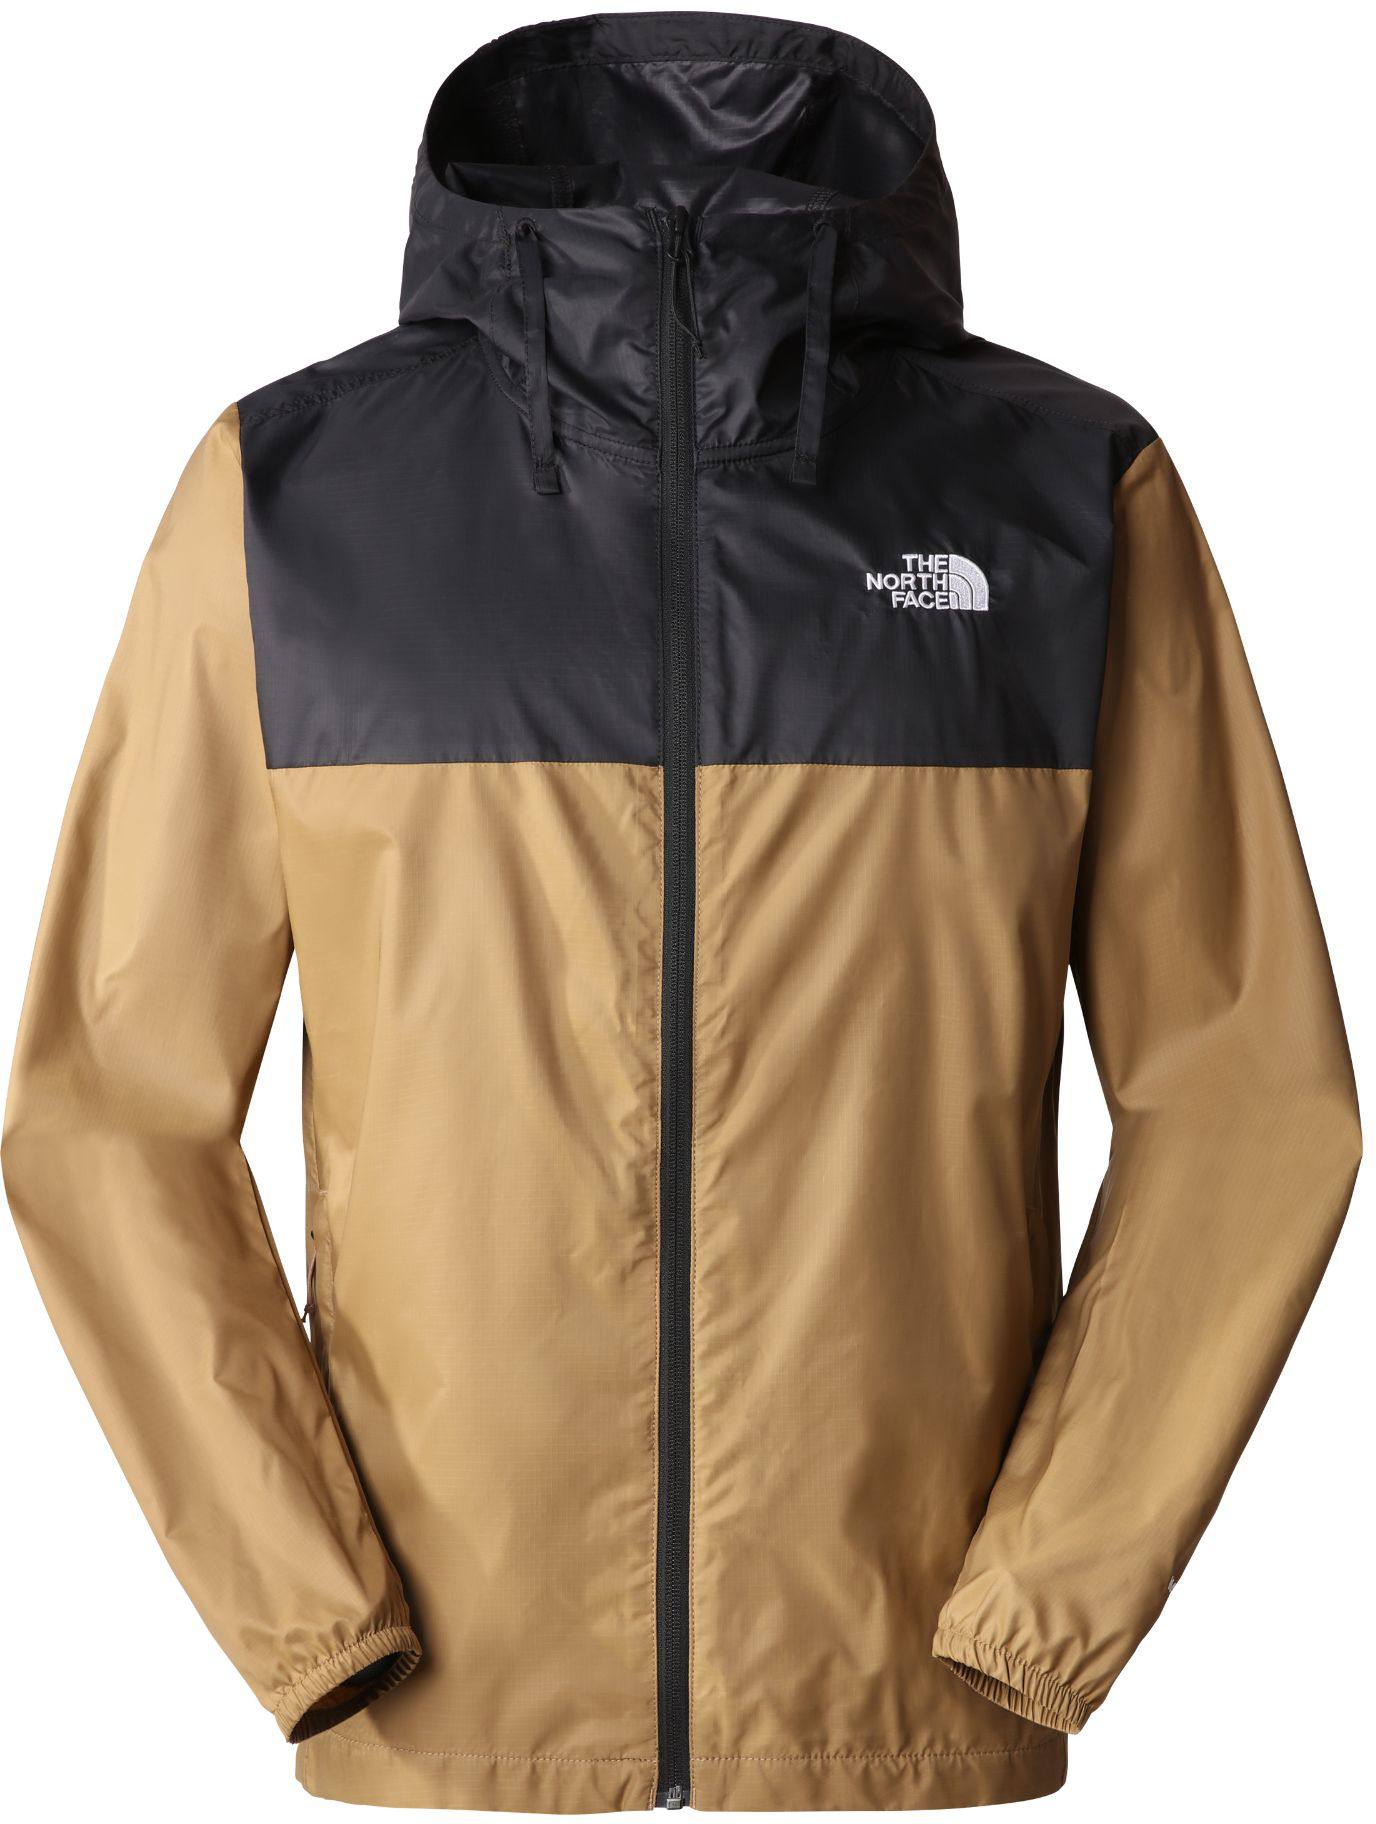 The North Face Men’s Cyclone 3 Jacket